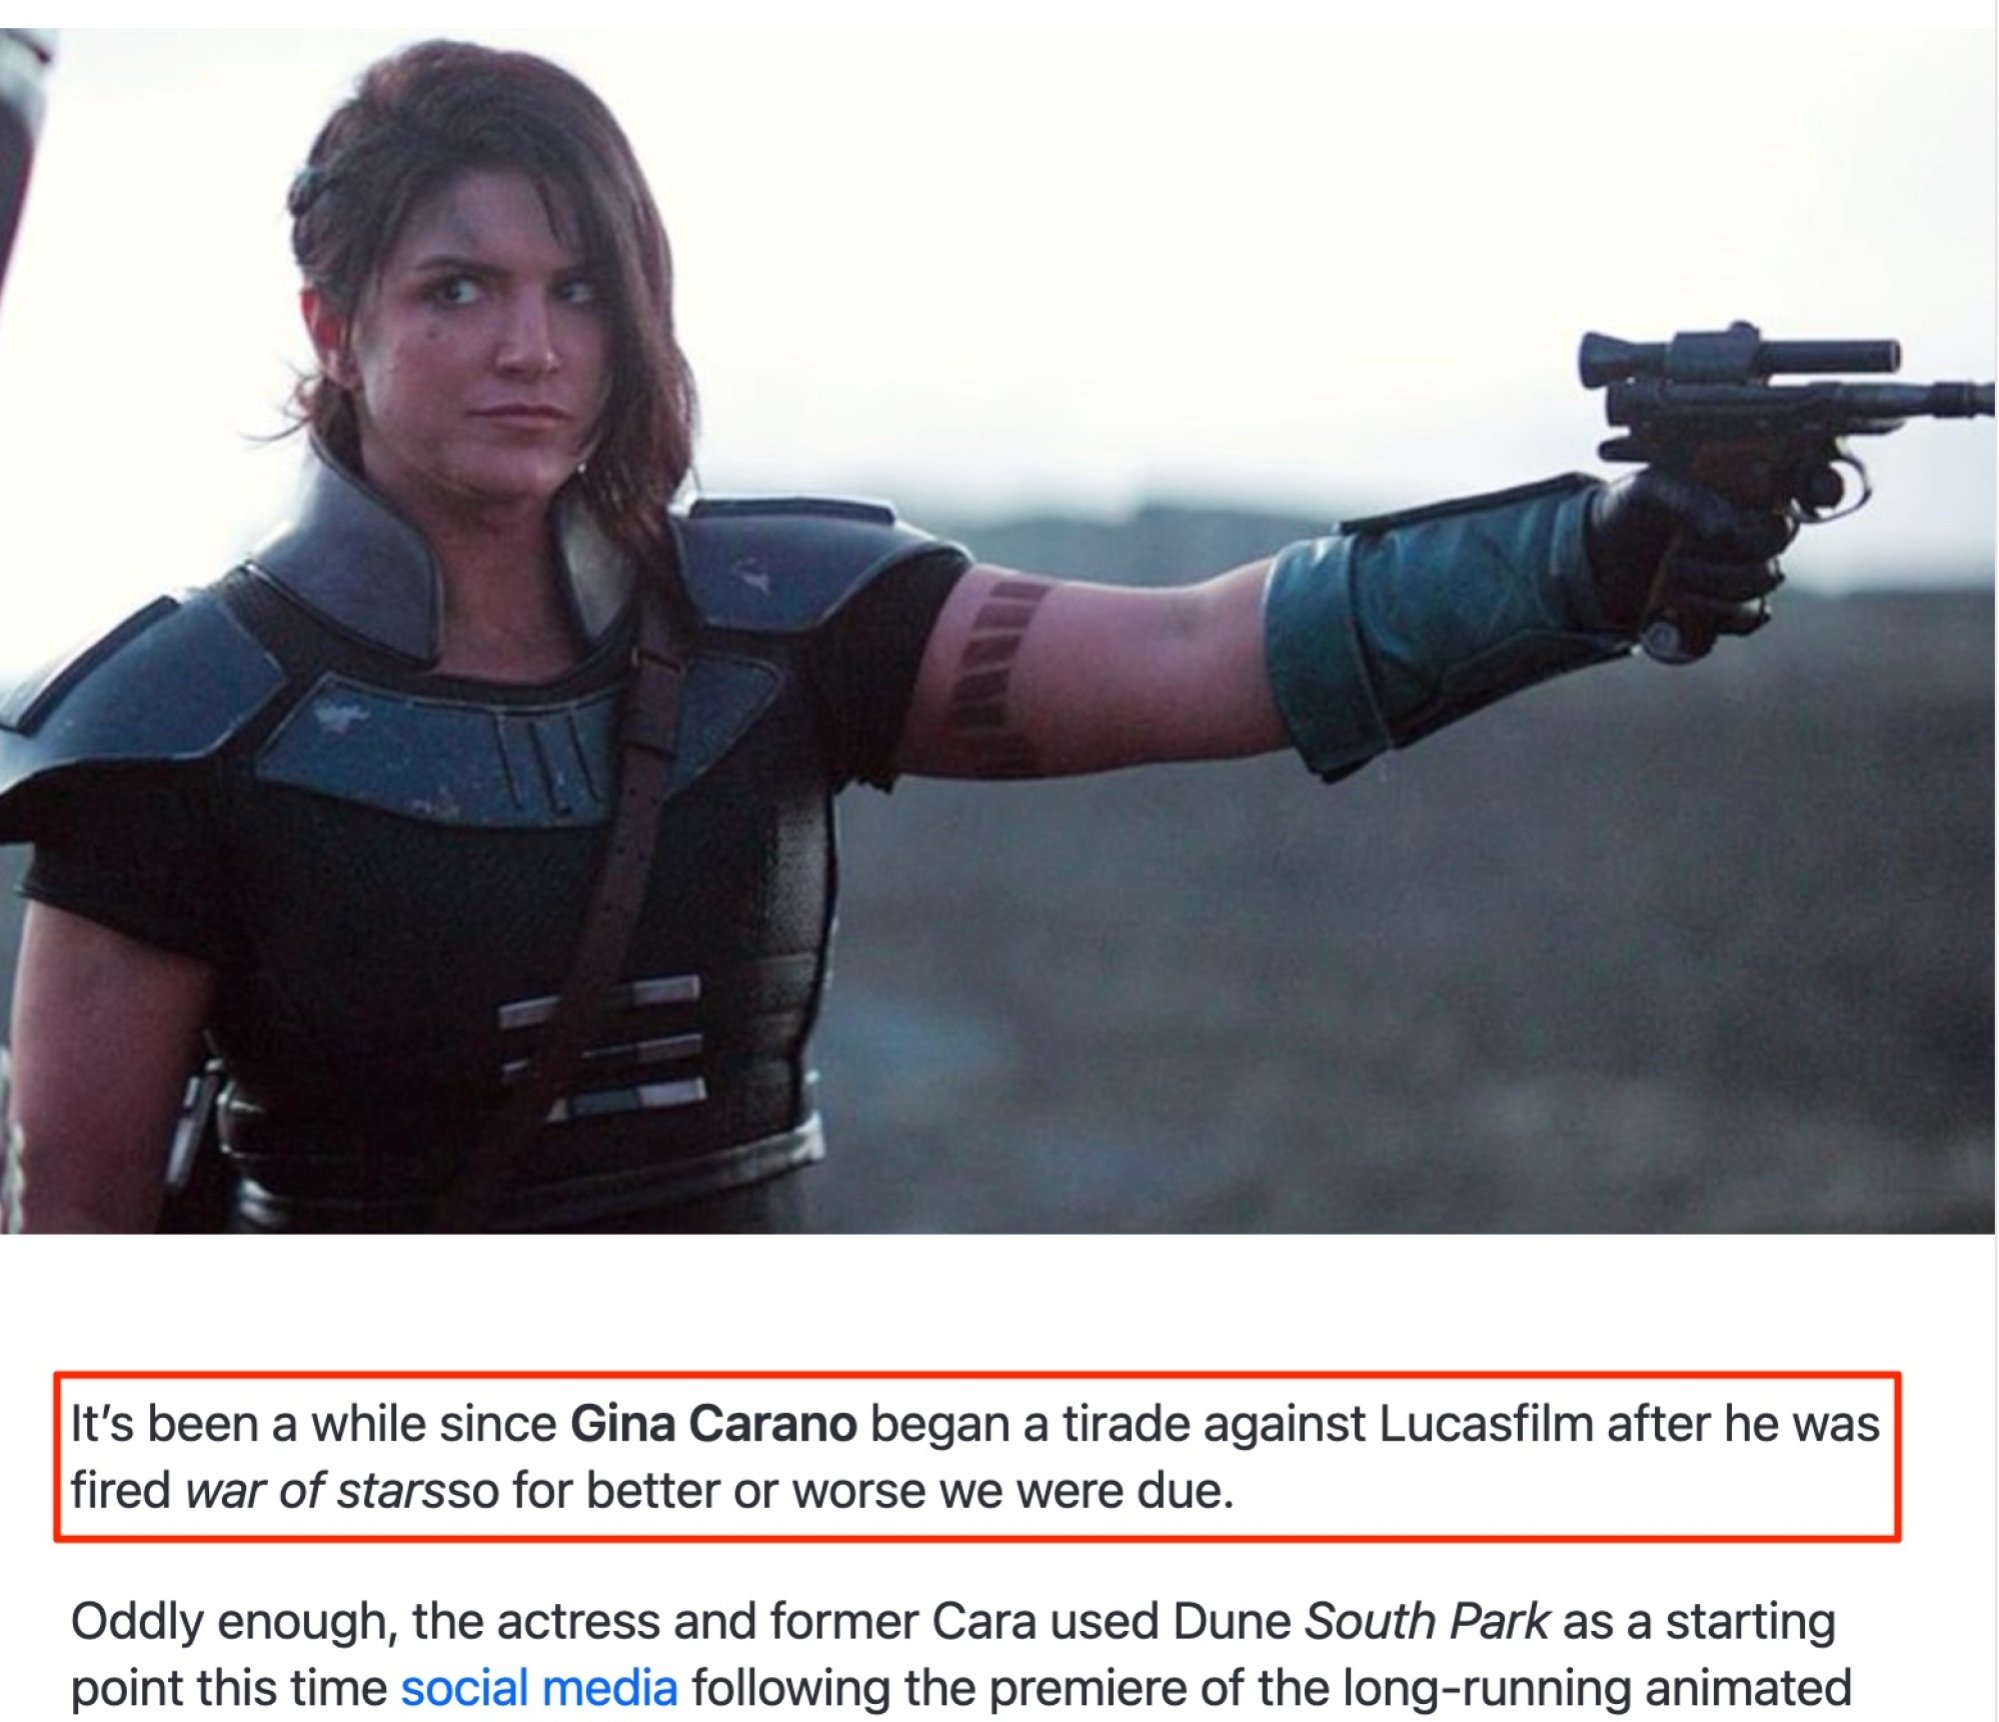 image of gina carano holding a gun above a highlighted portion of ai-generated text